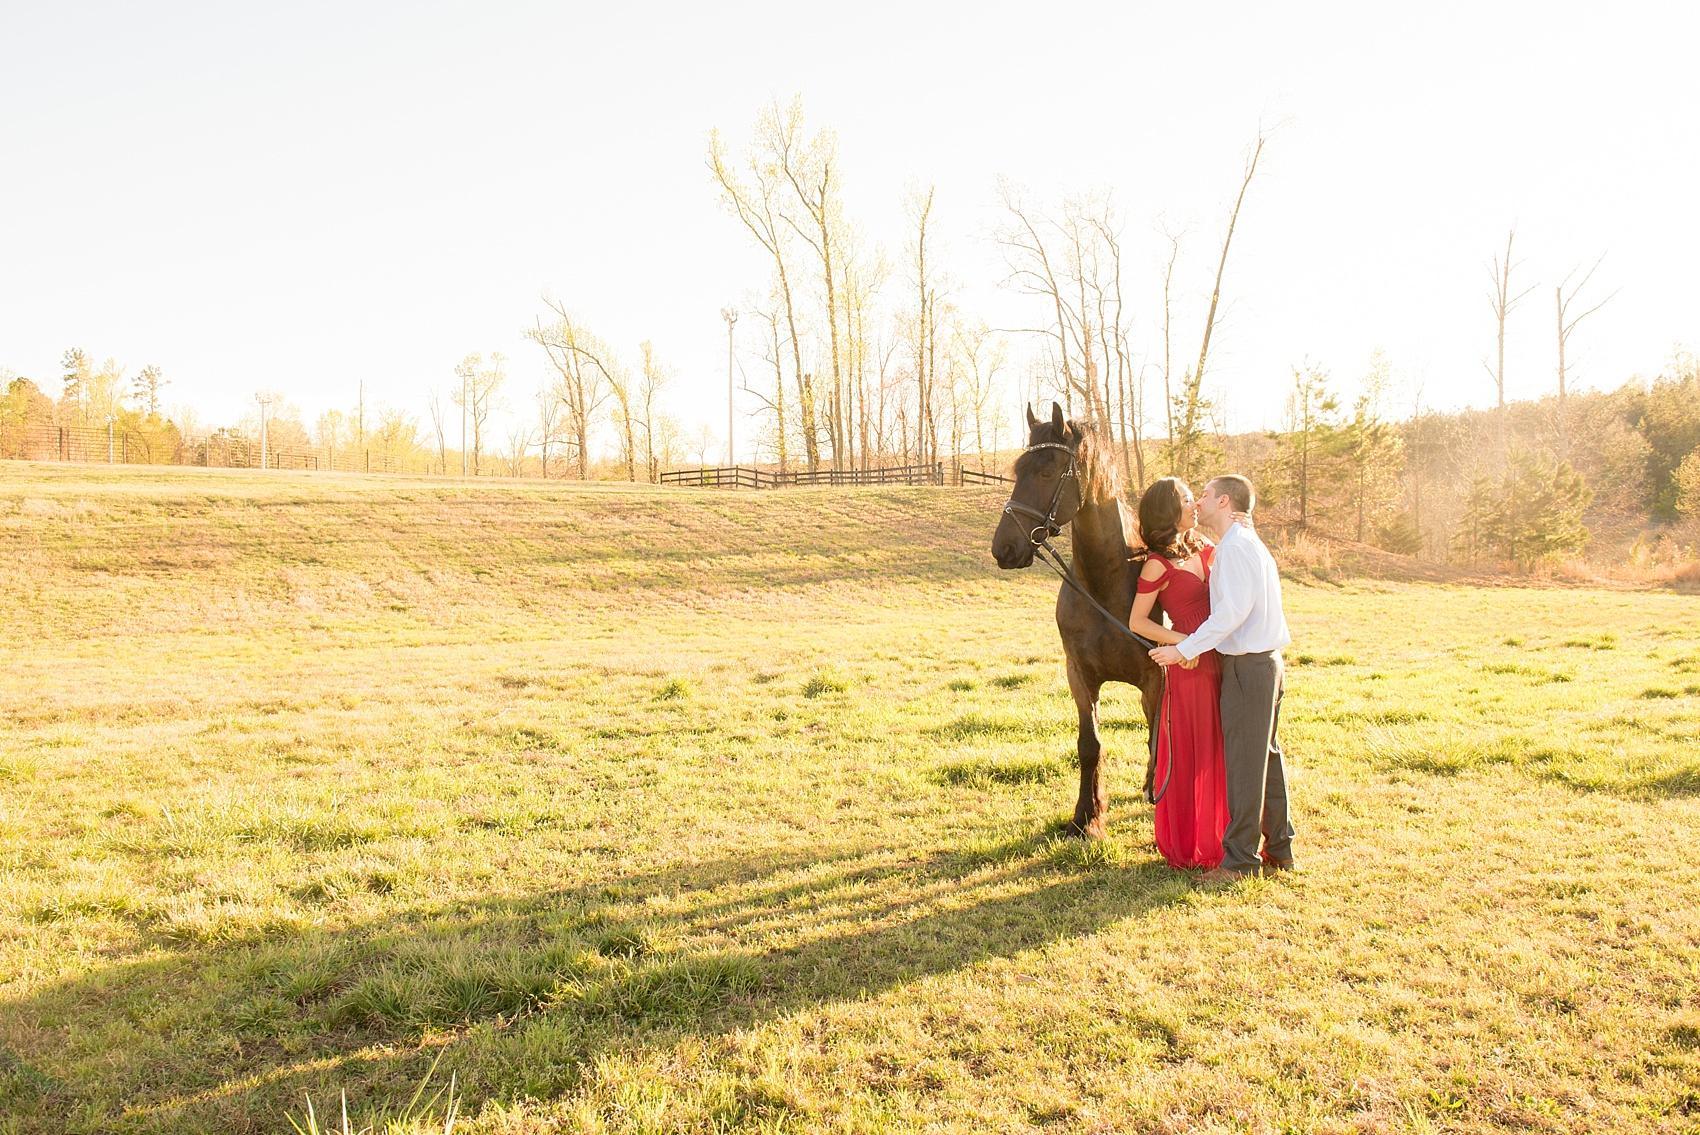 Raleigh engagement photos at Ovation Farm in Sanford by Mikkel Paige Photography. The golden hour was perfect for this horse image in a field with the bride in red.